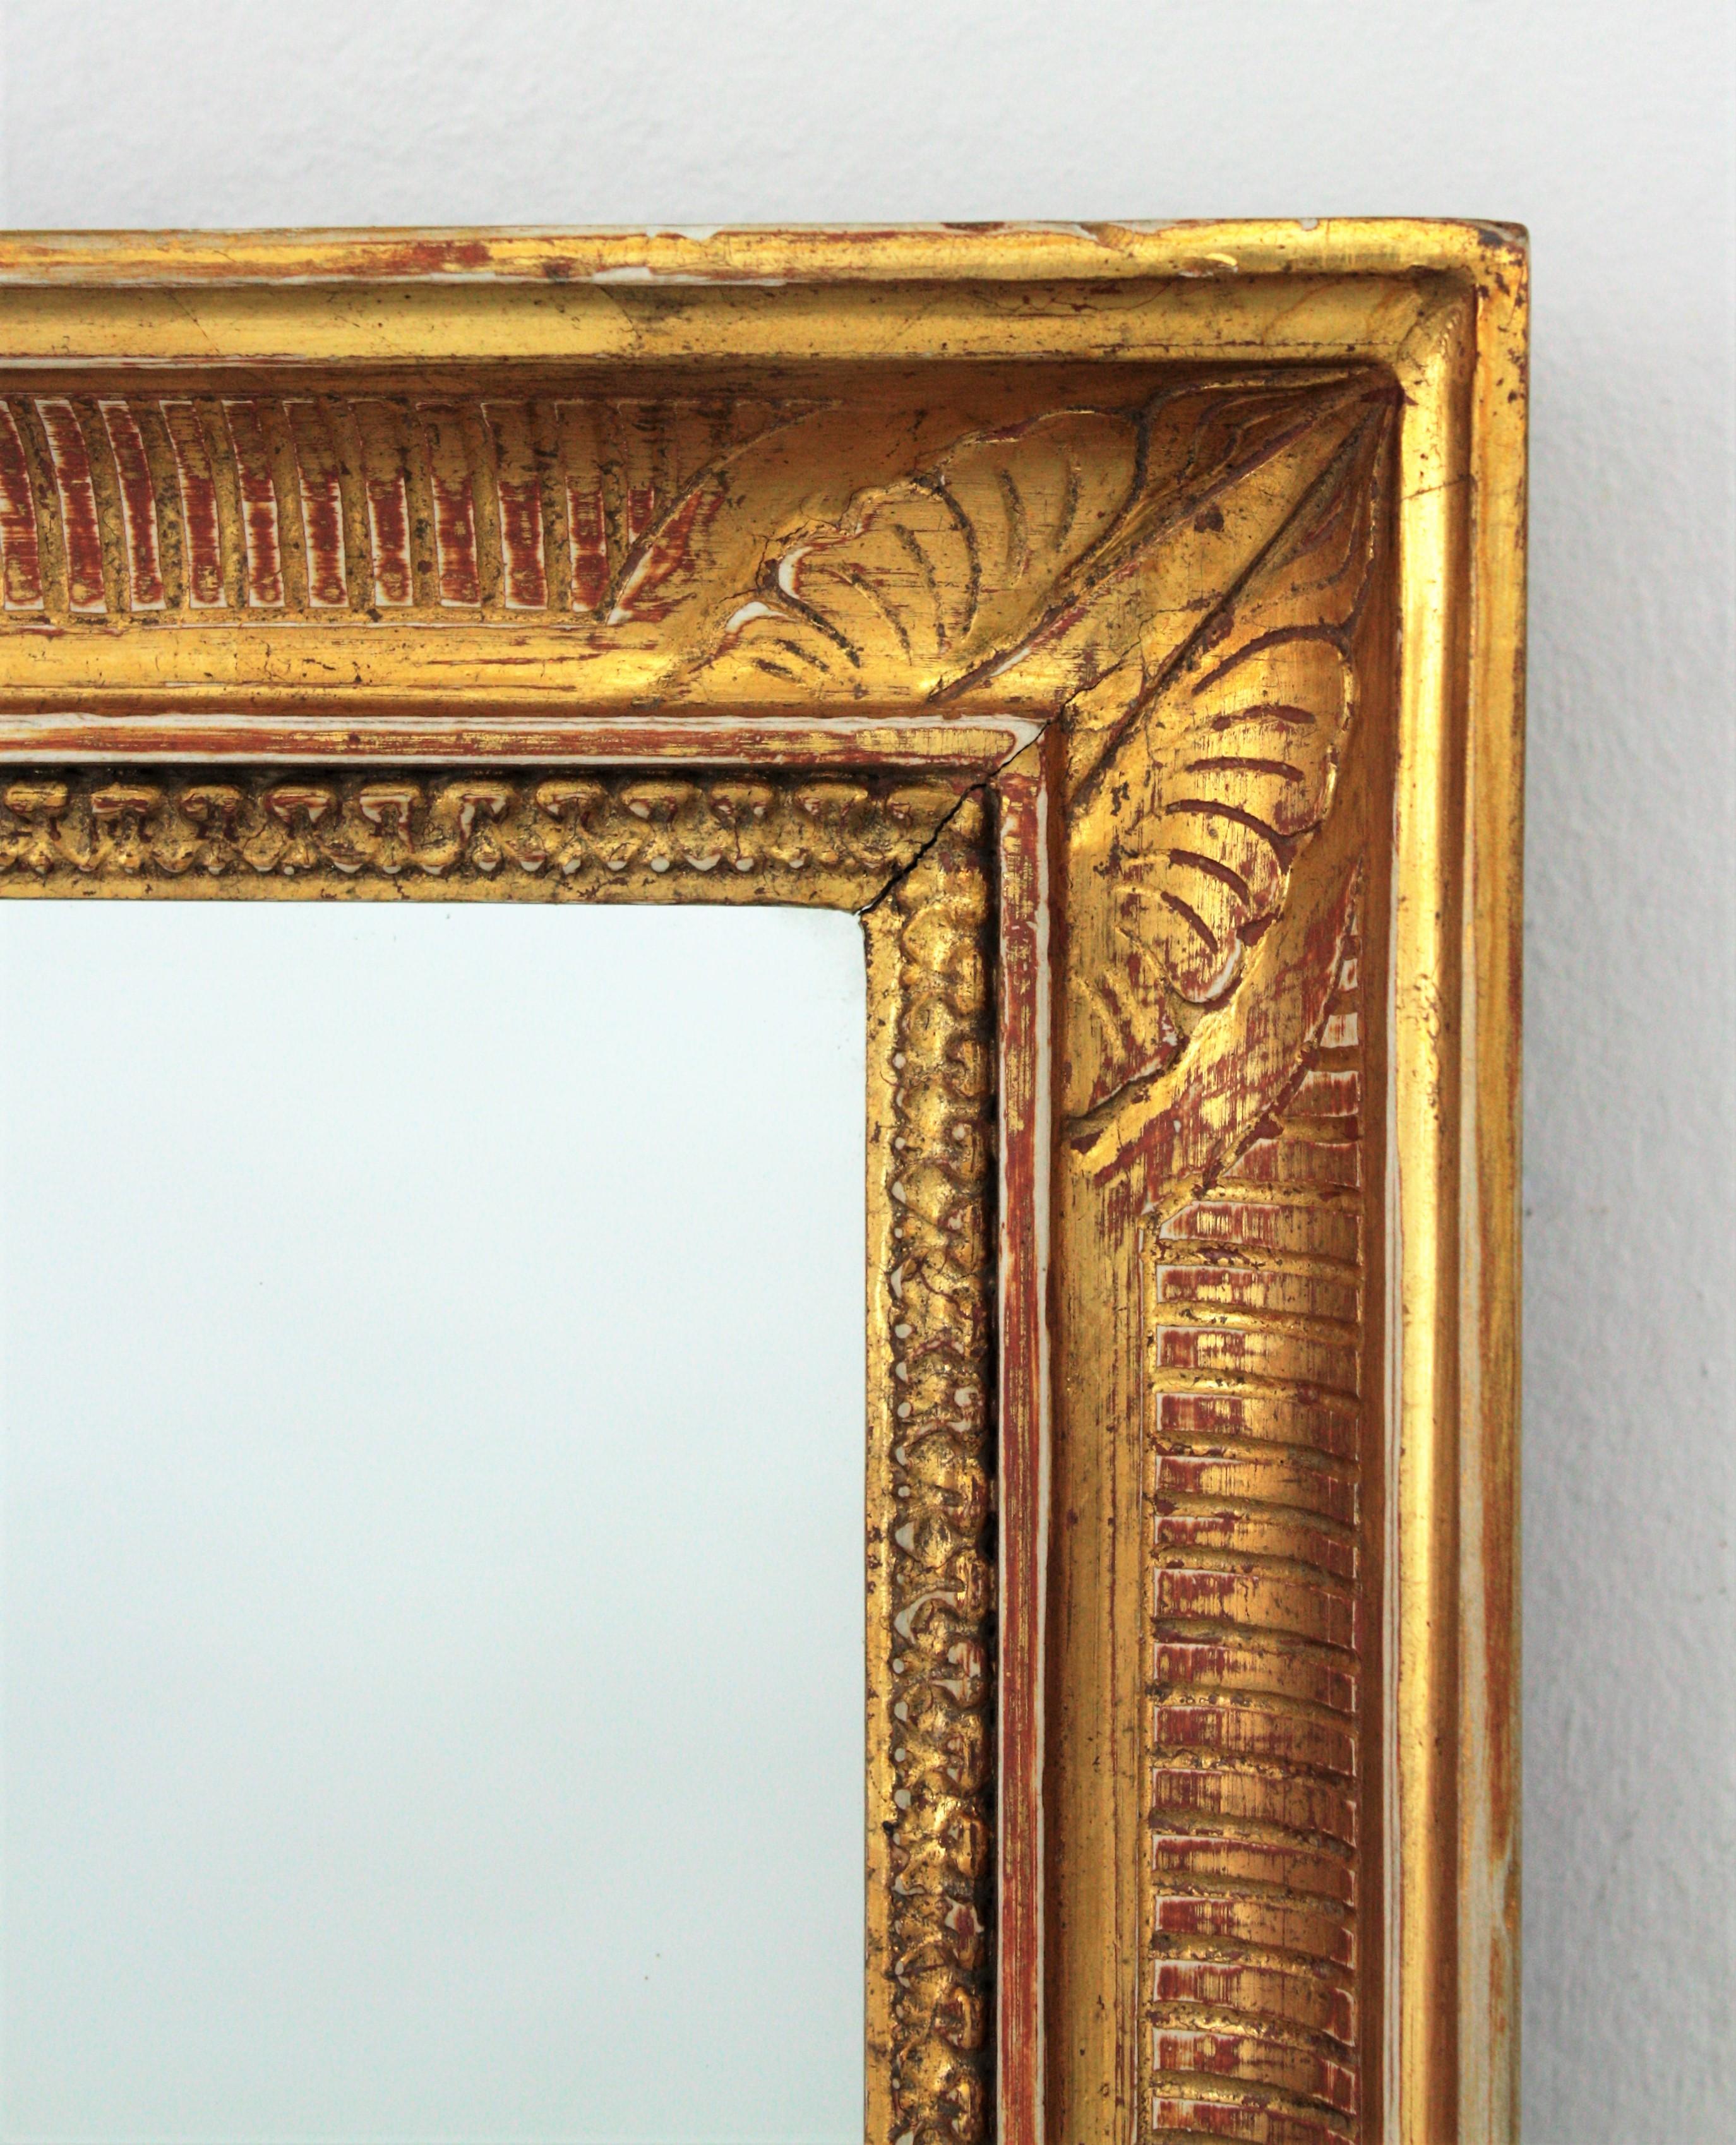 Large early 20th century giltwood Empire style mantel mirror or wall mirror, France, 1930s.
The original gold leaf gilded mirror frame is detailed with stripped molding and classical motifs at the corners. Excellent antique condition, wear to frame